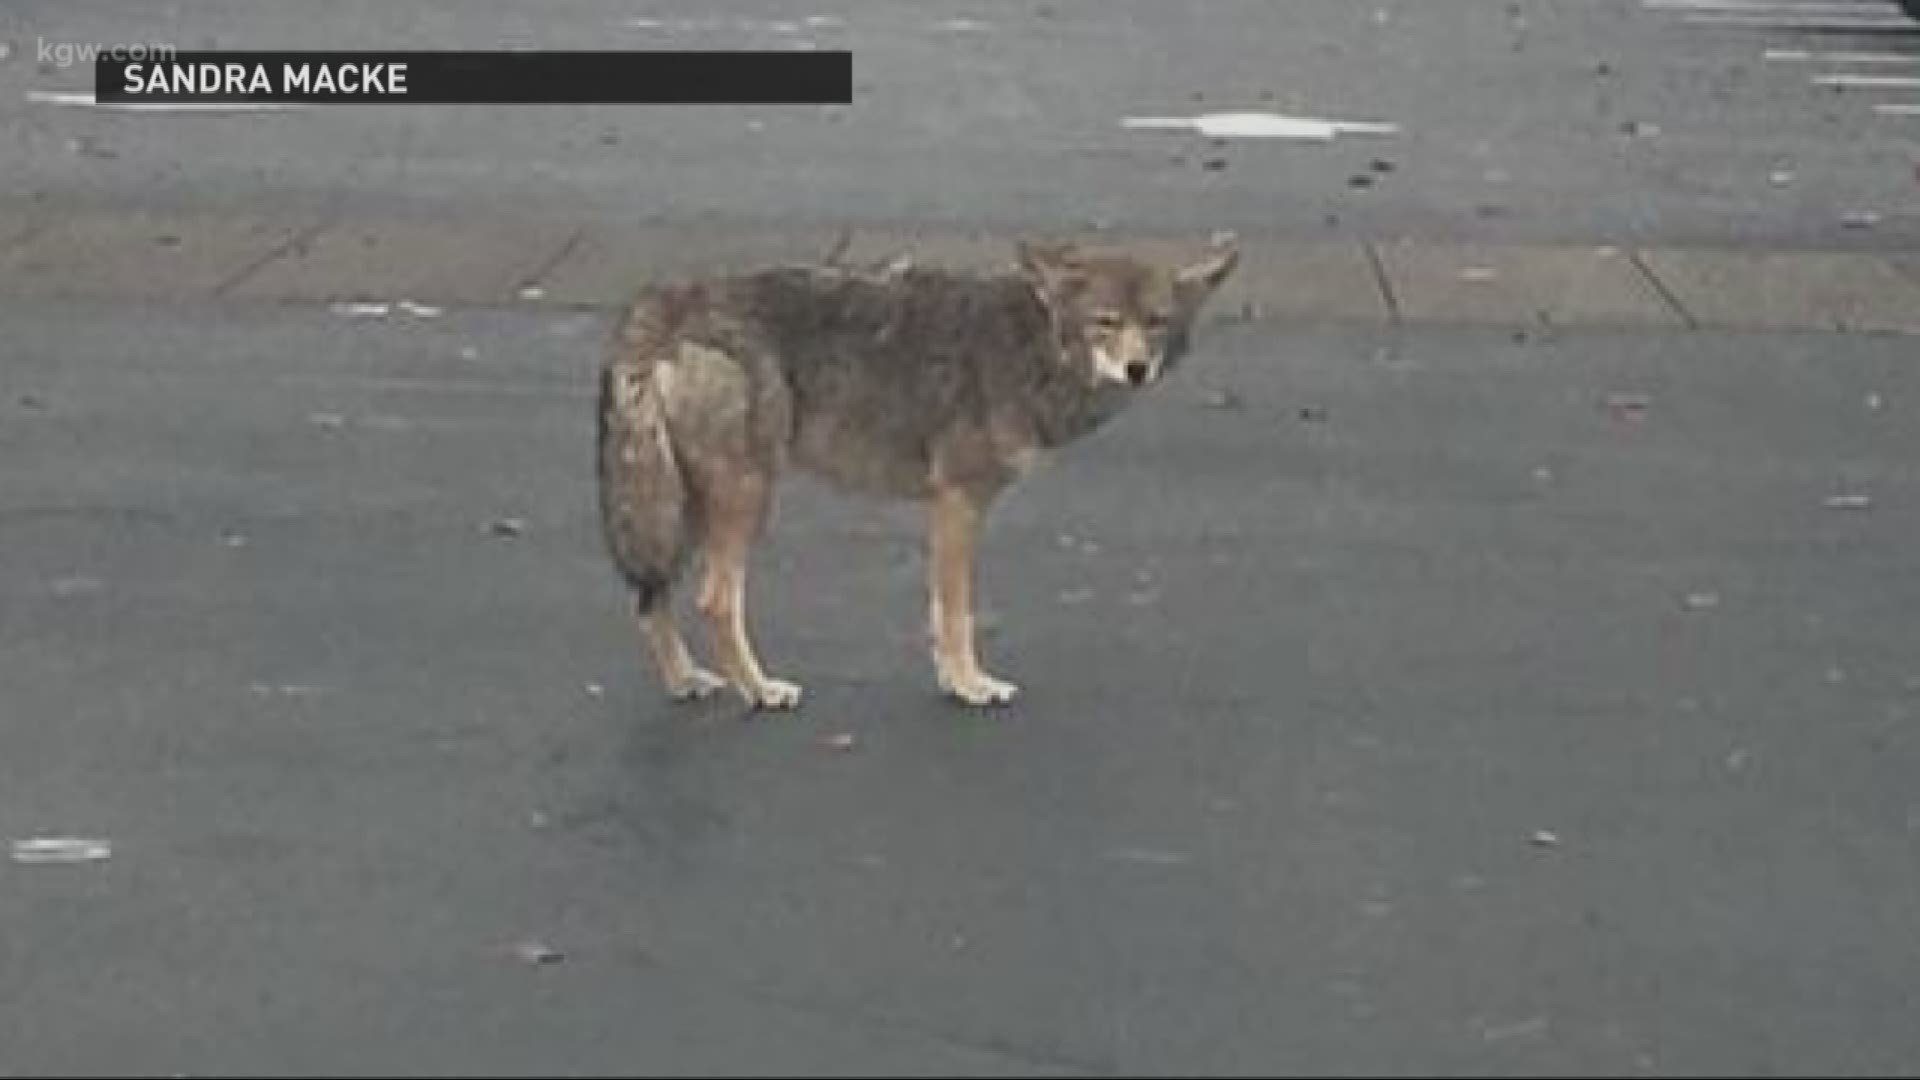 Tips on how to handle a coyote encounter